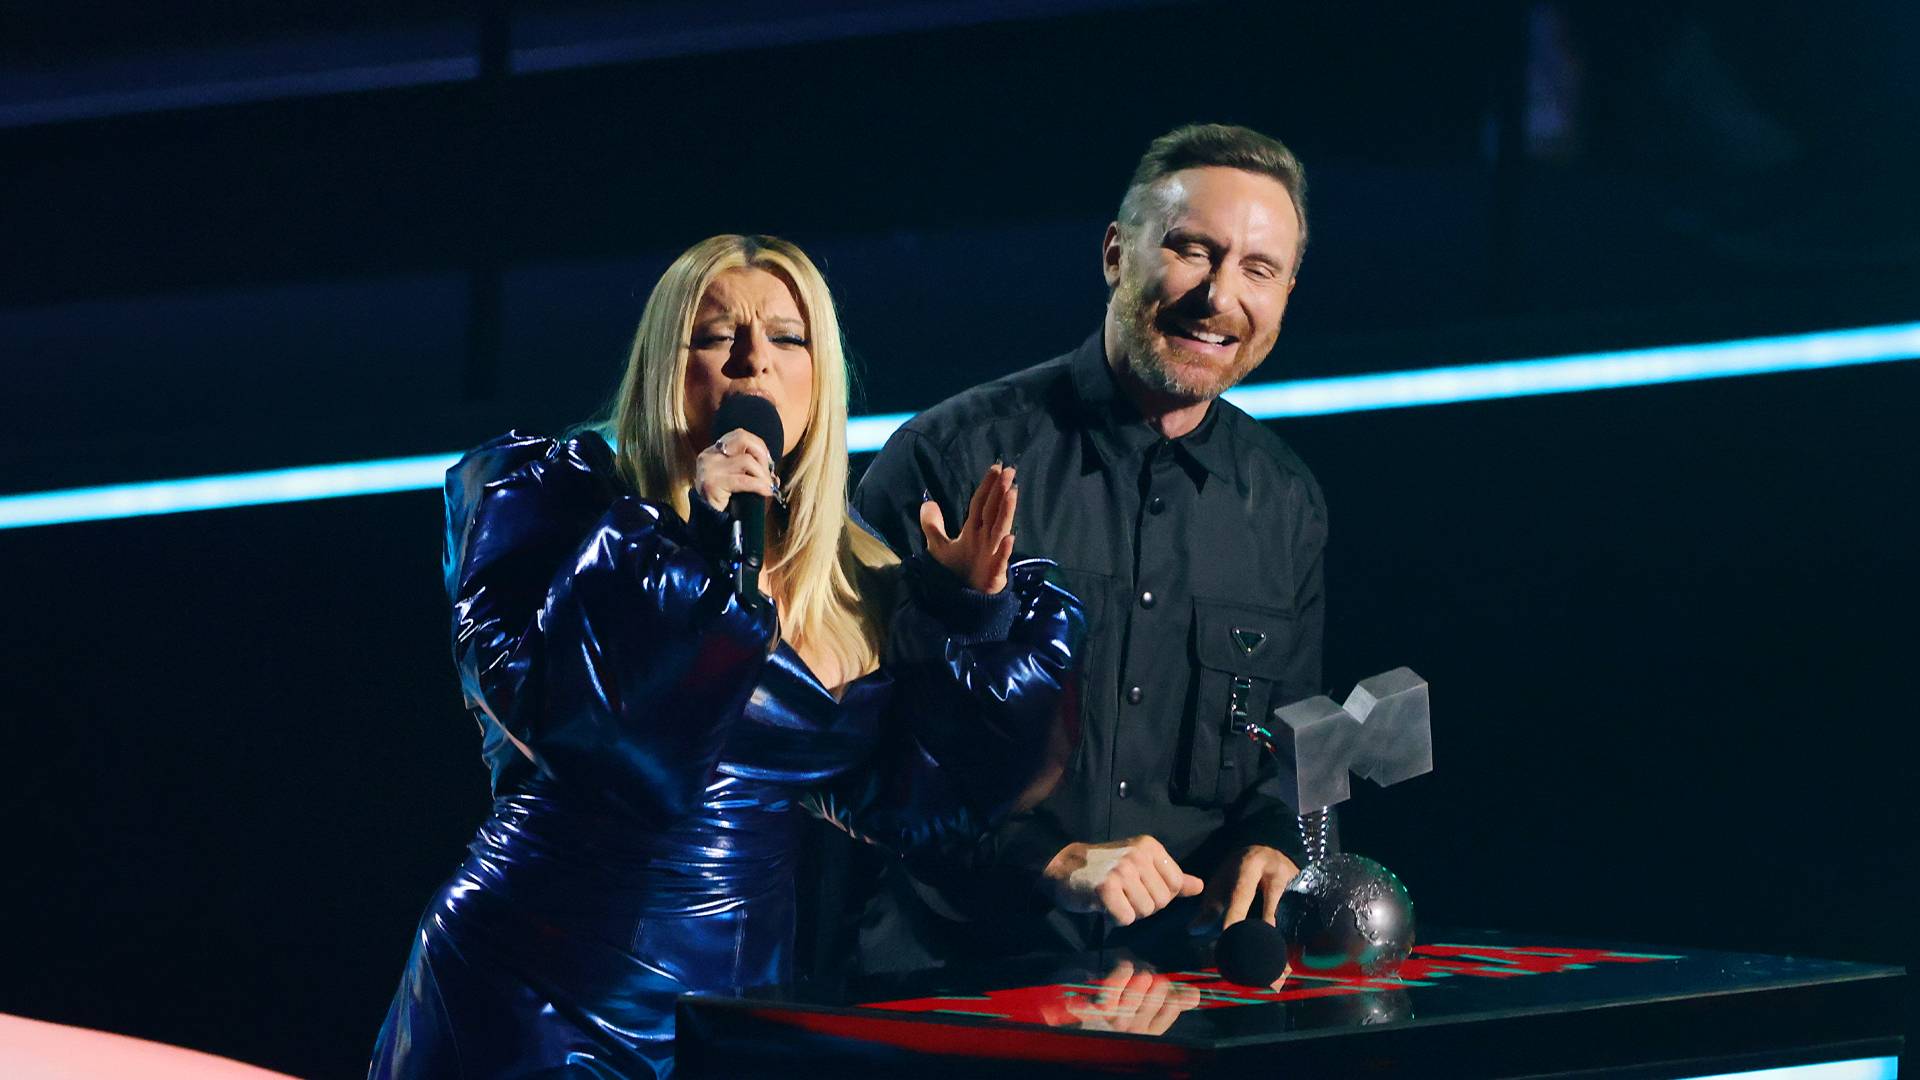 Bebe Rexha and David Guetta accept the Best Collaboration Award on stage during the MTV Europe Music Awards 2022 held at PSD Bank Dome on November 13, 2022 in Duesseldorf, Germany. (Photo by Andreas Rentz/Getty Images for MTV)